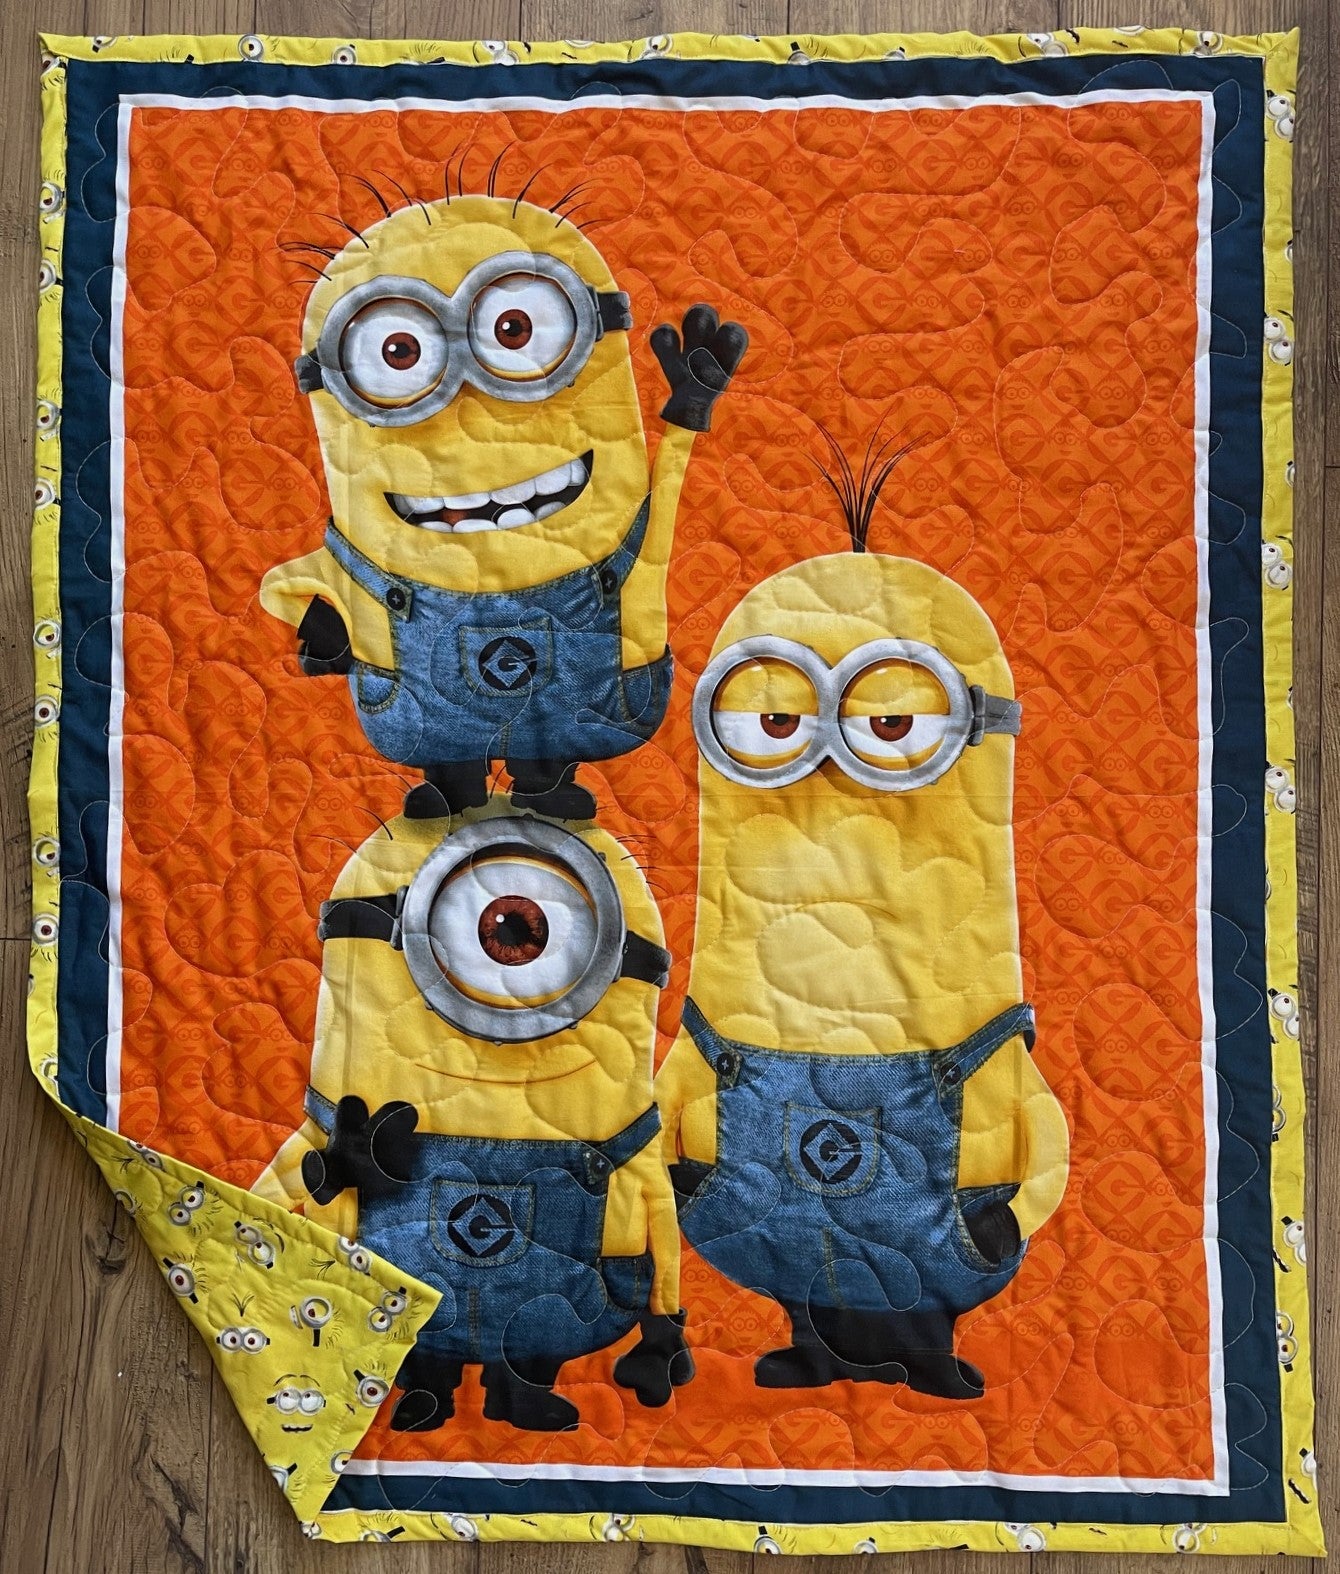 MINIONS, KEVIN, STUART & BOB DESPICABLE ME INSPIRED QUILTED BLANKET